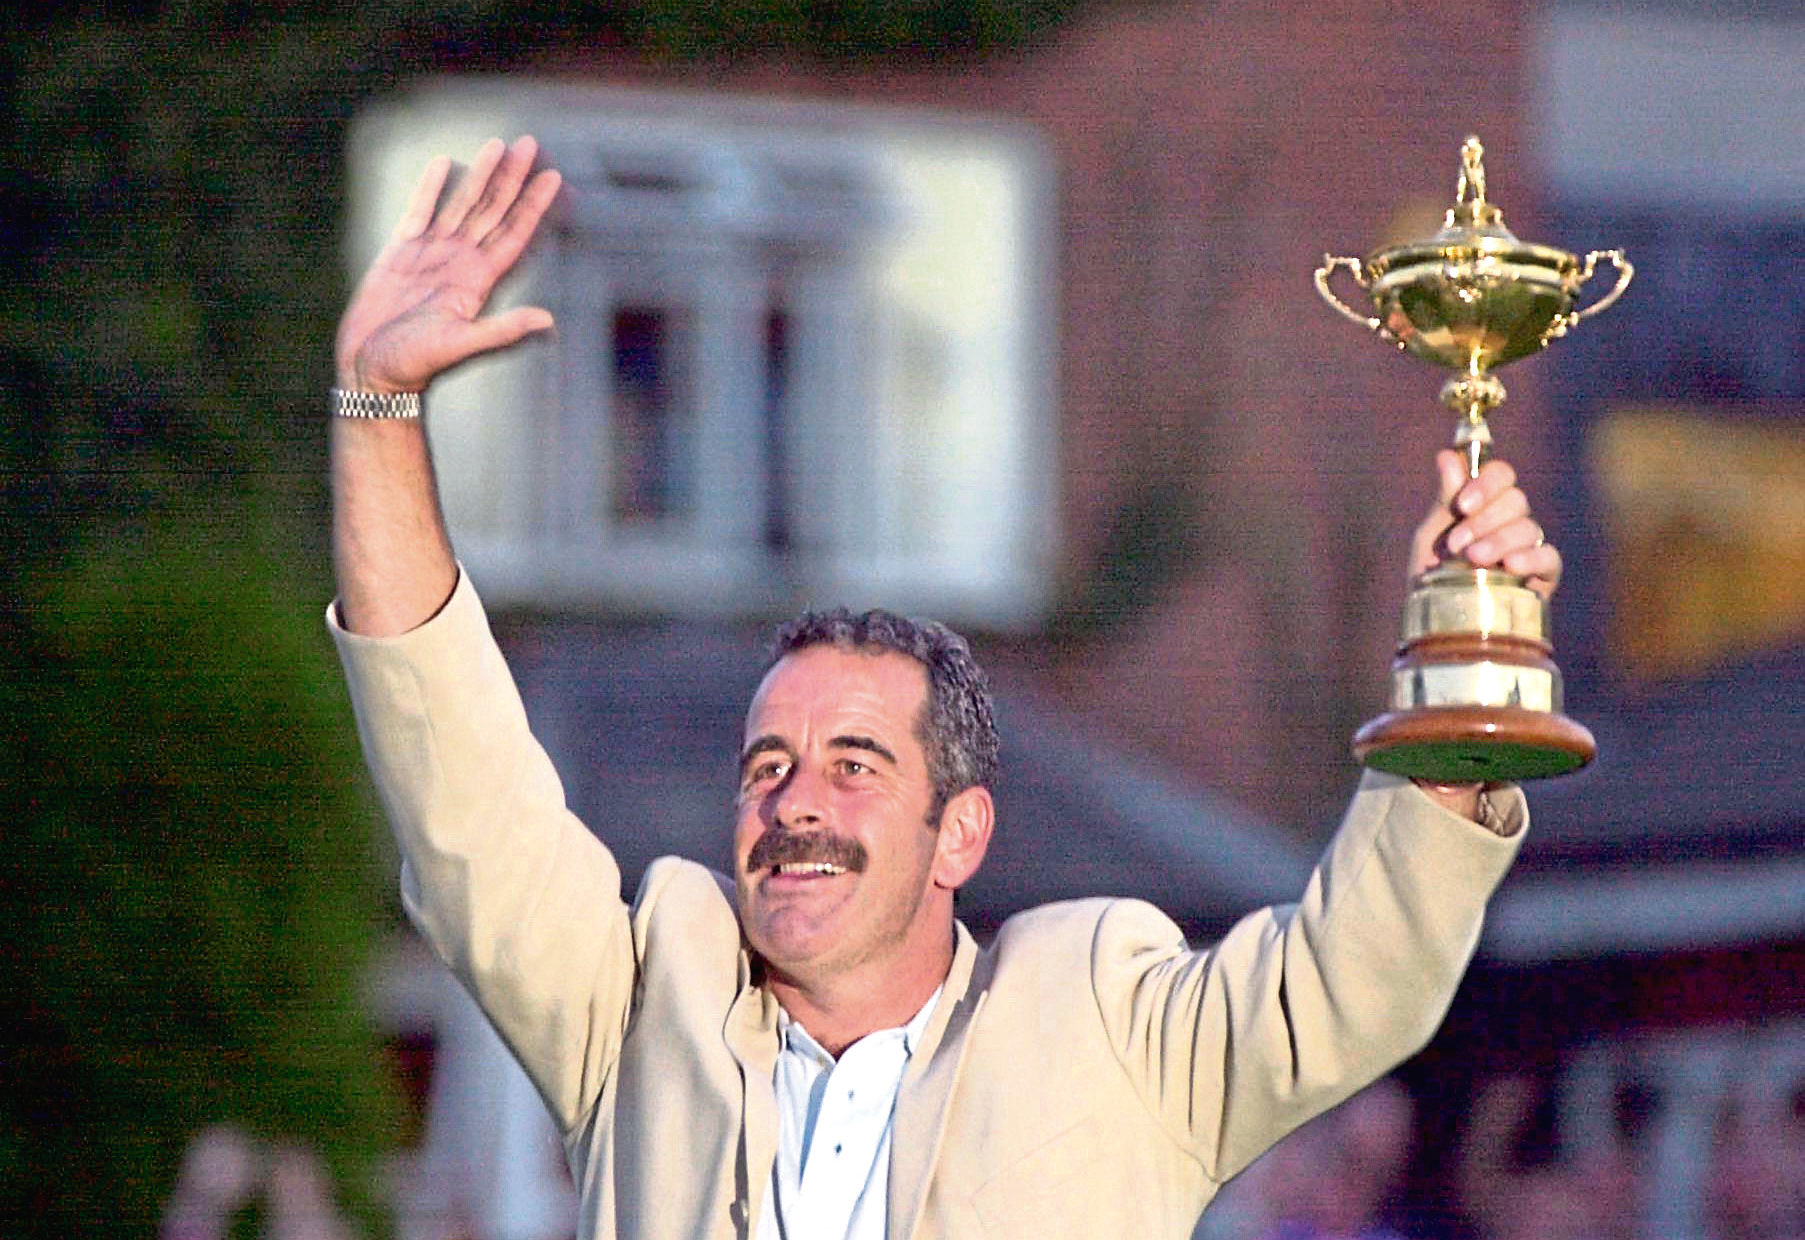 Europe's team captain Sam Torrance holds up the Ryder Cup after the presentation at the Belfry, near Sutton Coldfield following his team's defeat of the USA.